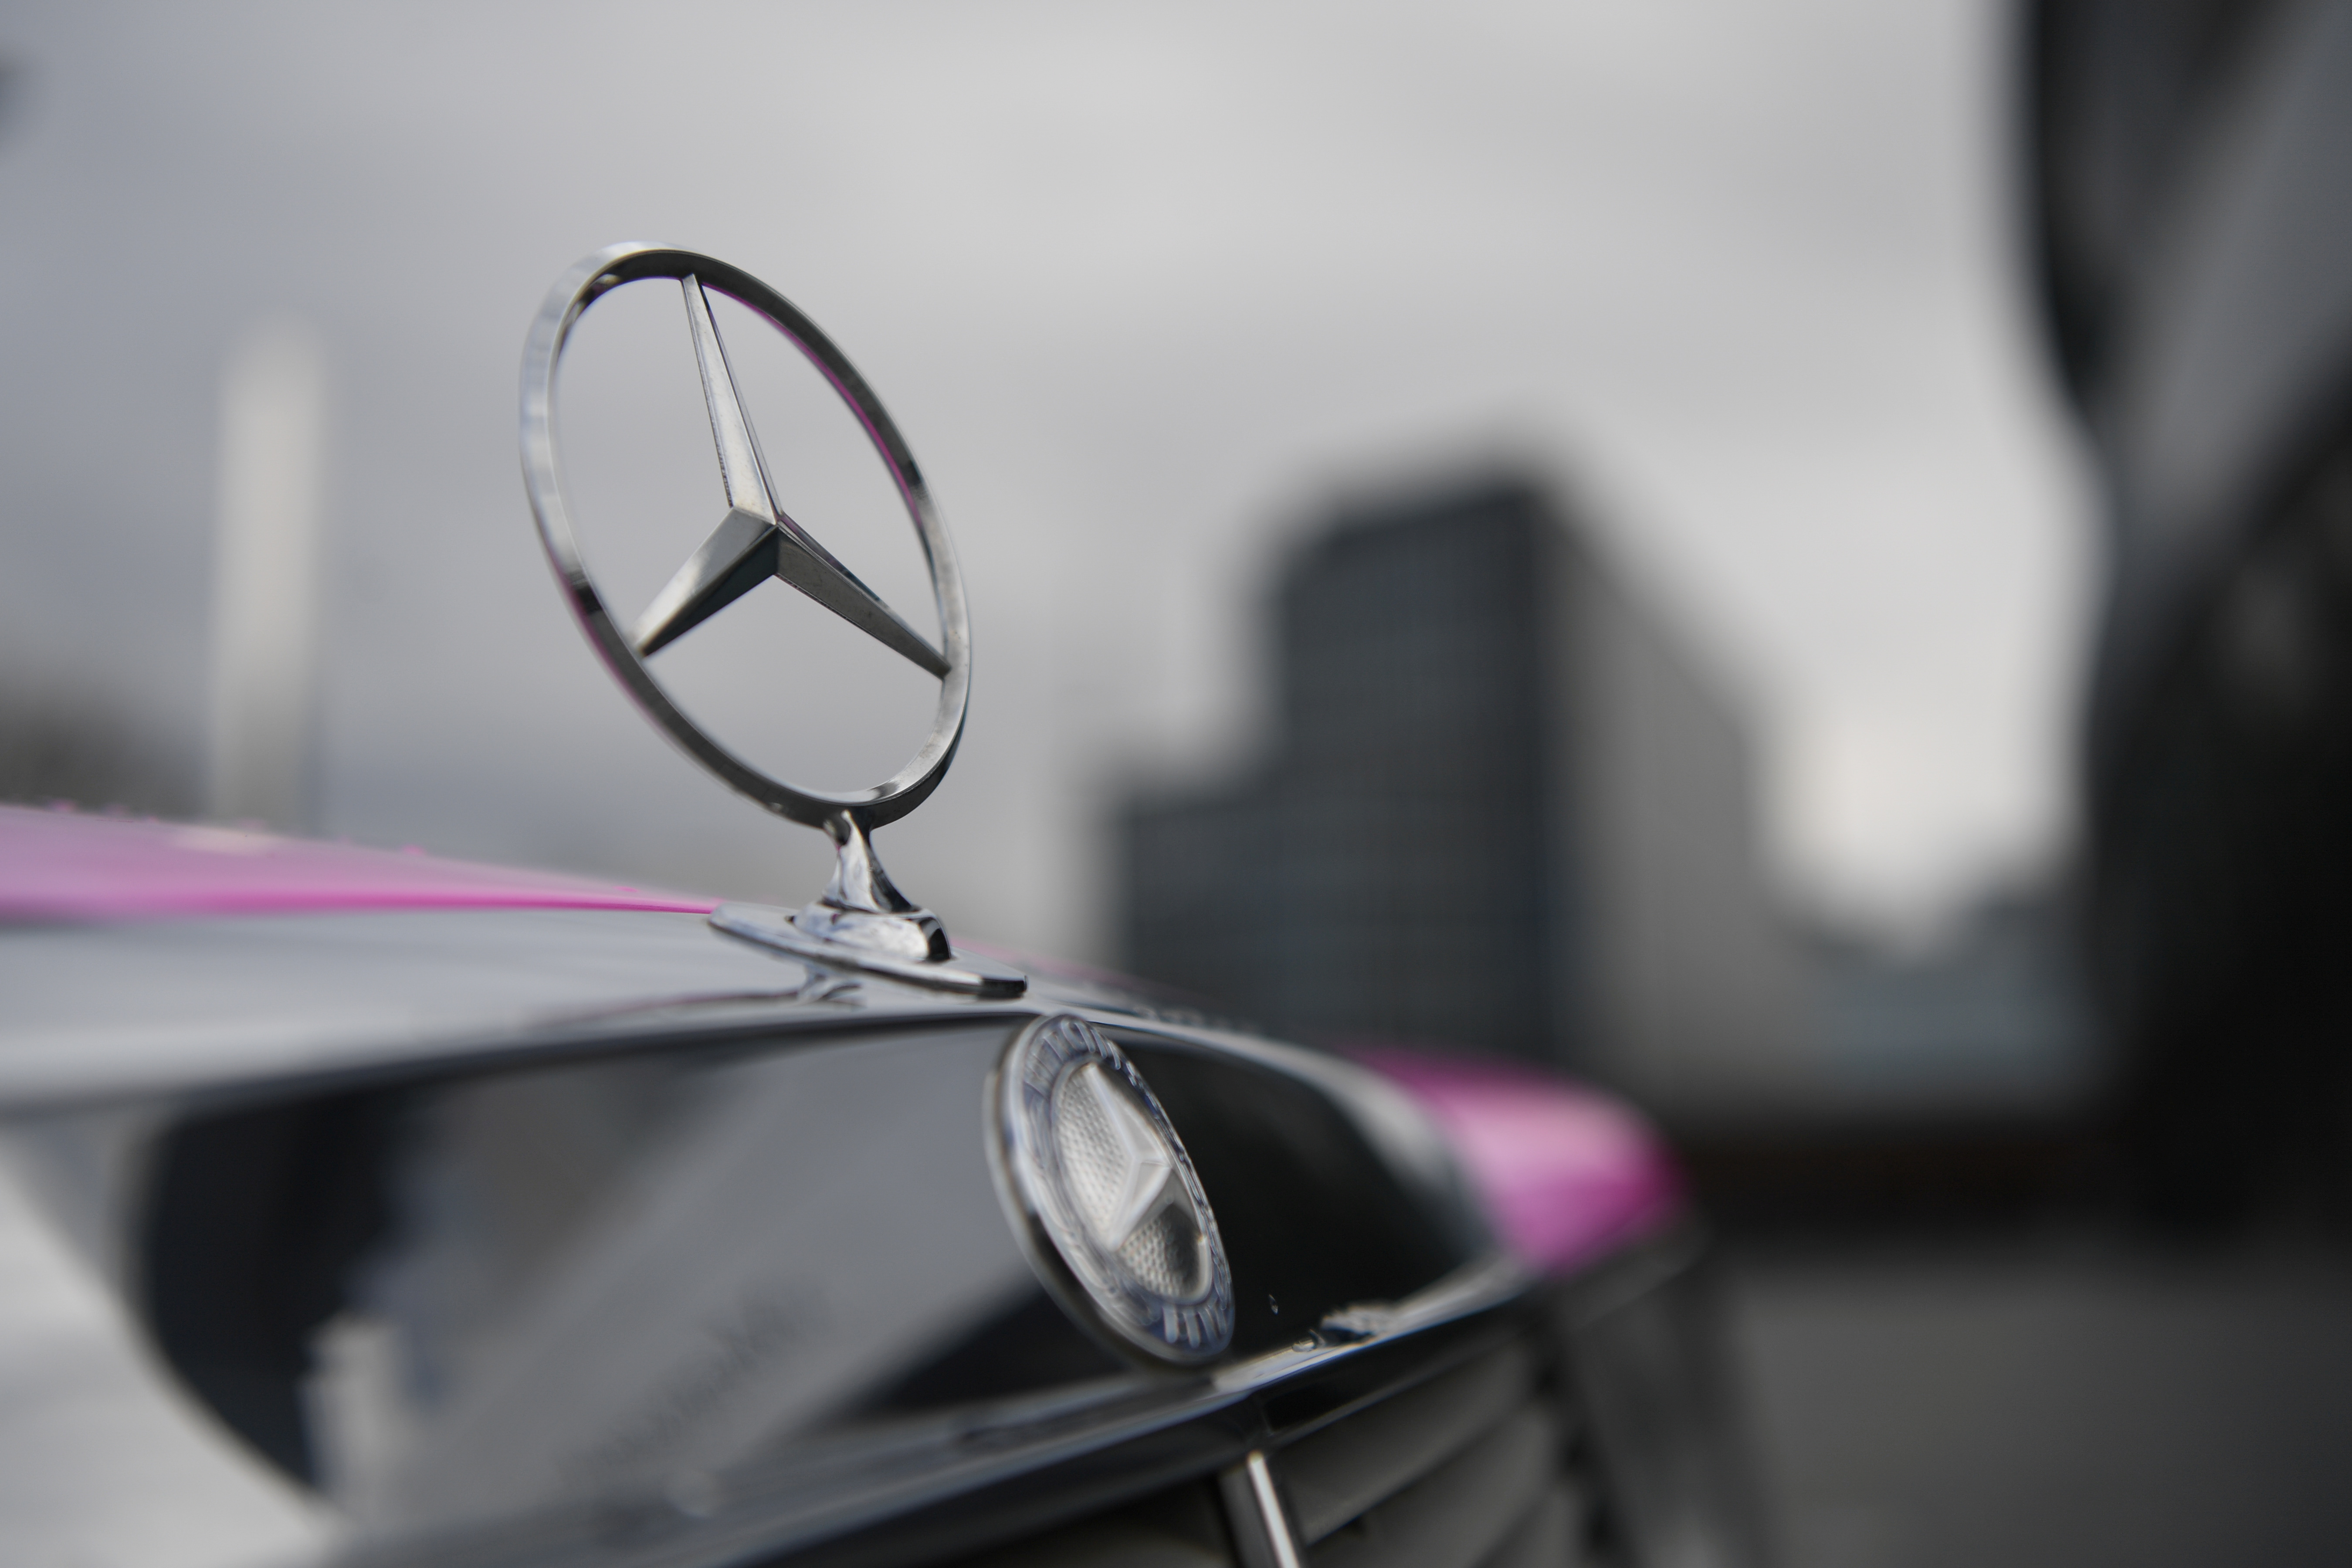 The Mercedes-Benz logo is seen on a car in front of the Mercedes-Benz Museum in Stuttgart